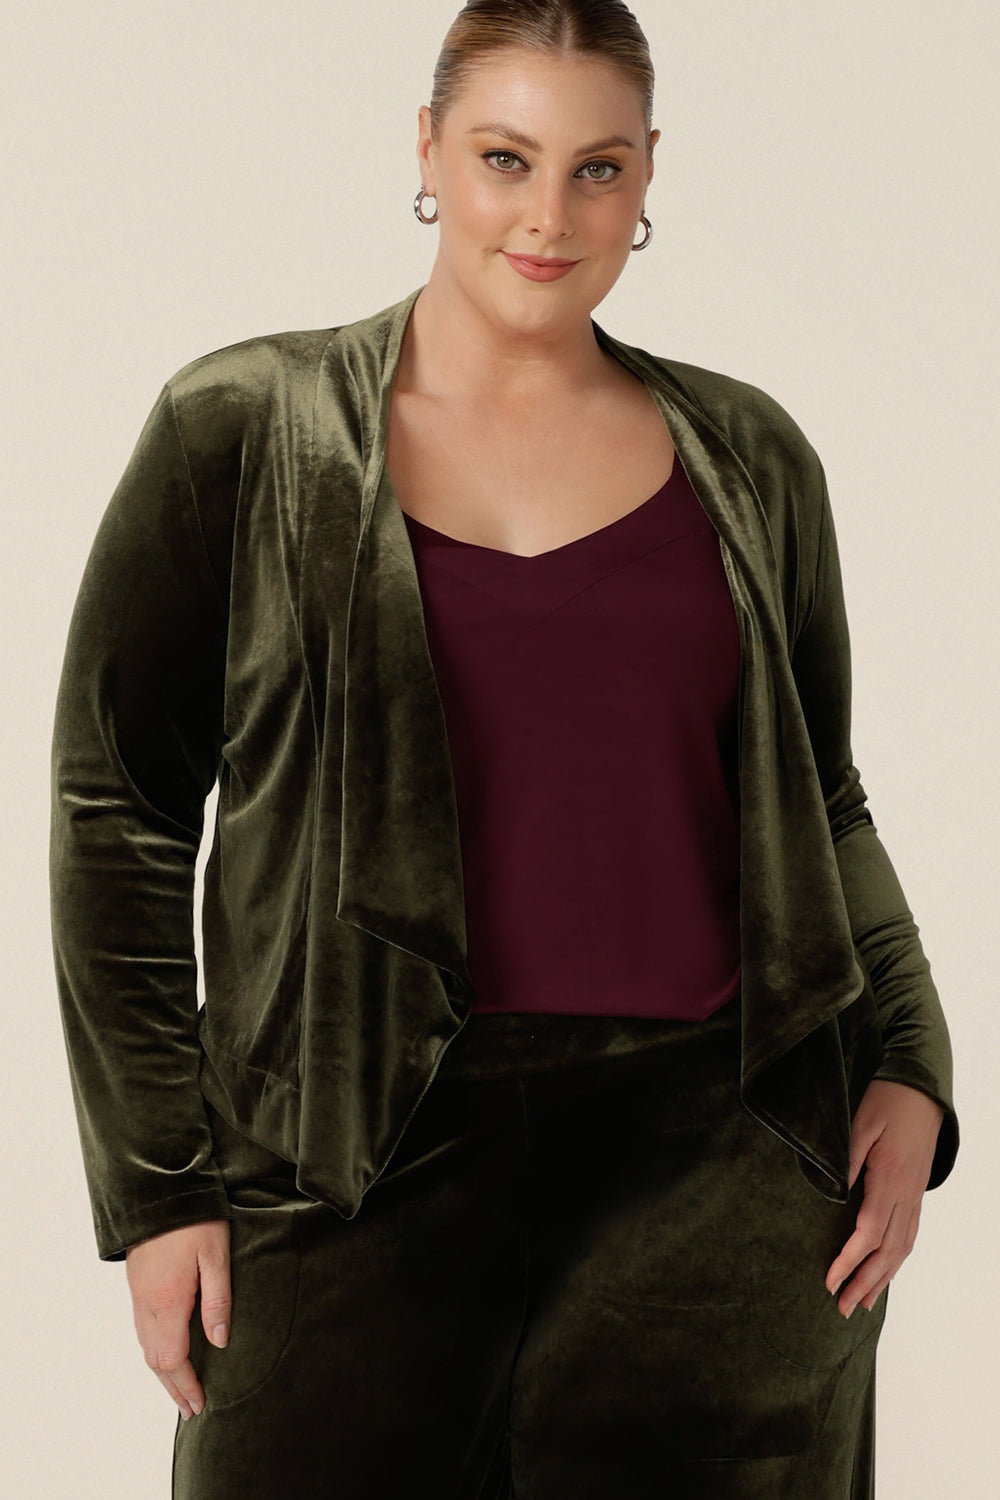 A size 18, plus size woman wears a waterfall front velour jacket for curve evening and cocktail wear. In bracken green this cocktail jacket is good for evening, occasion and wedding guest outfits. Shop made-in-Australian occasionwear in petite to plus sizes at Leina & Fleur.